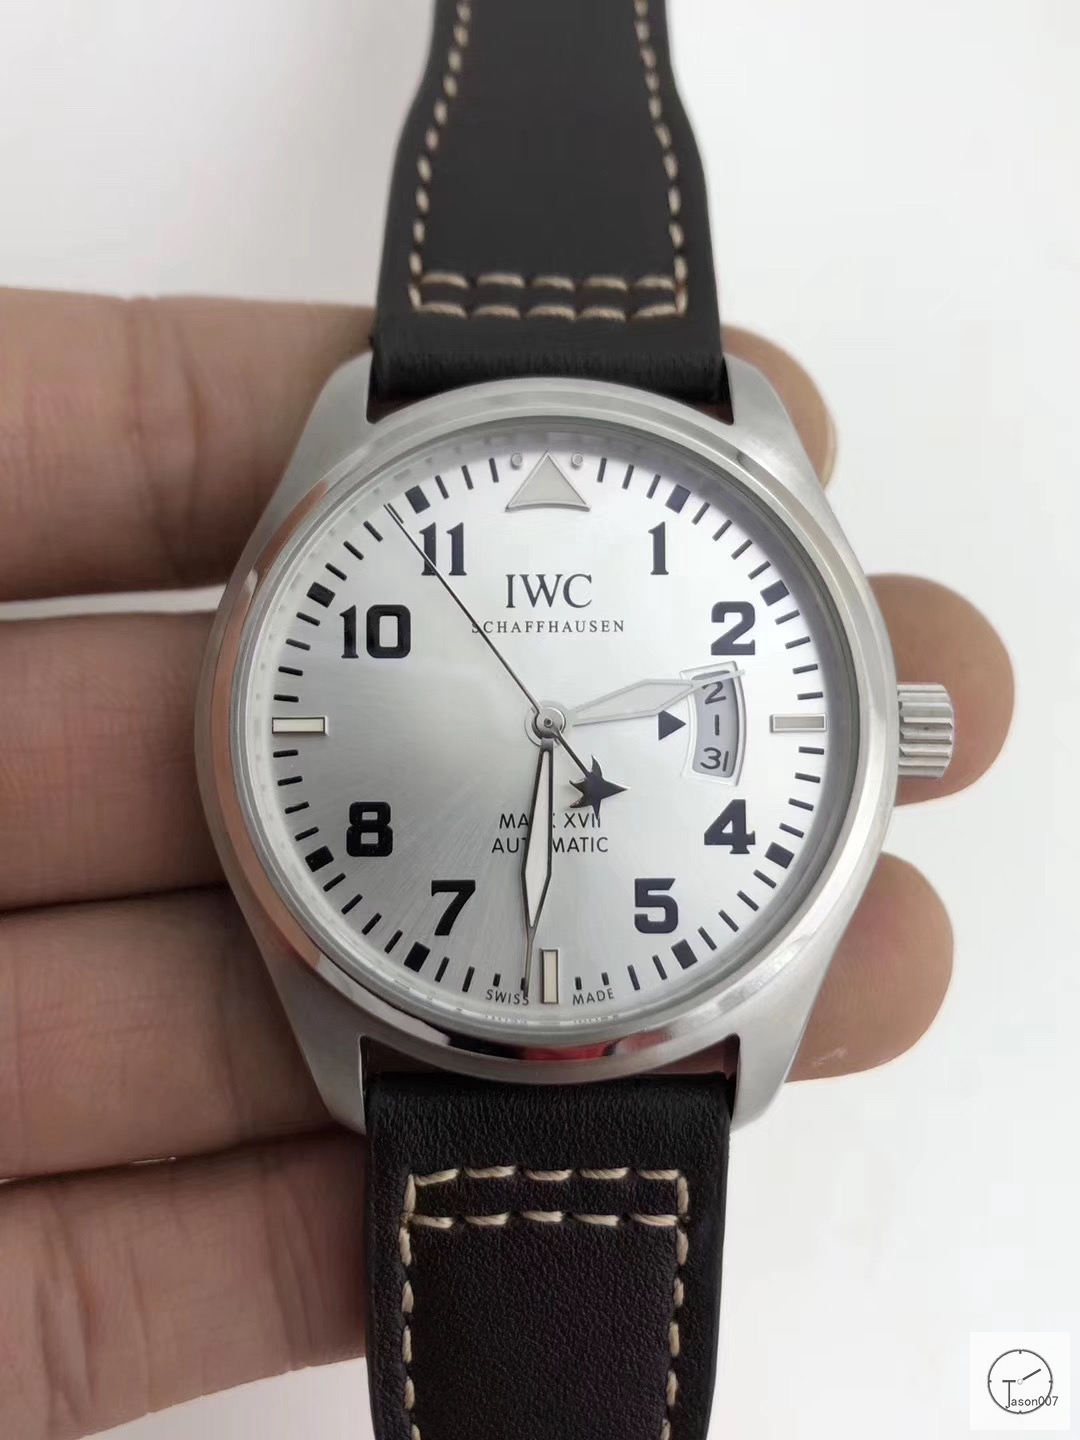 IWC PILOT'S SCHAFFHAUSEN Mark XV2 WATCH AUTOMATIC SPITFIRE AUTOMATIC Mechical IW326803 42MM BLACK DIAL Everose Gold Case Stainless Steel Case Stainless Steel Strap Mens Wristwatches ICW22240560